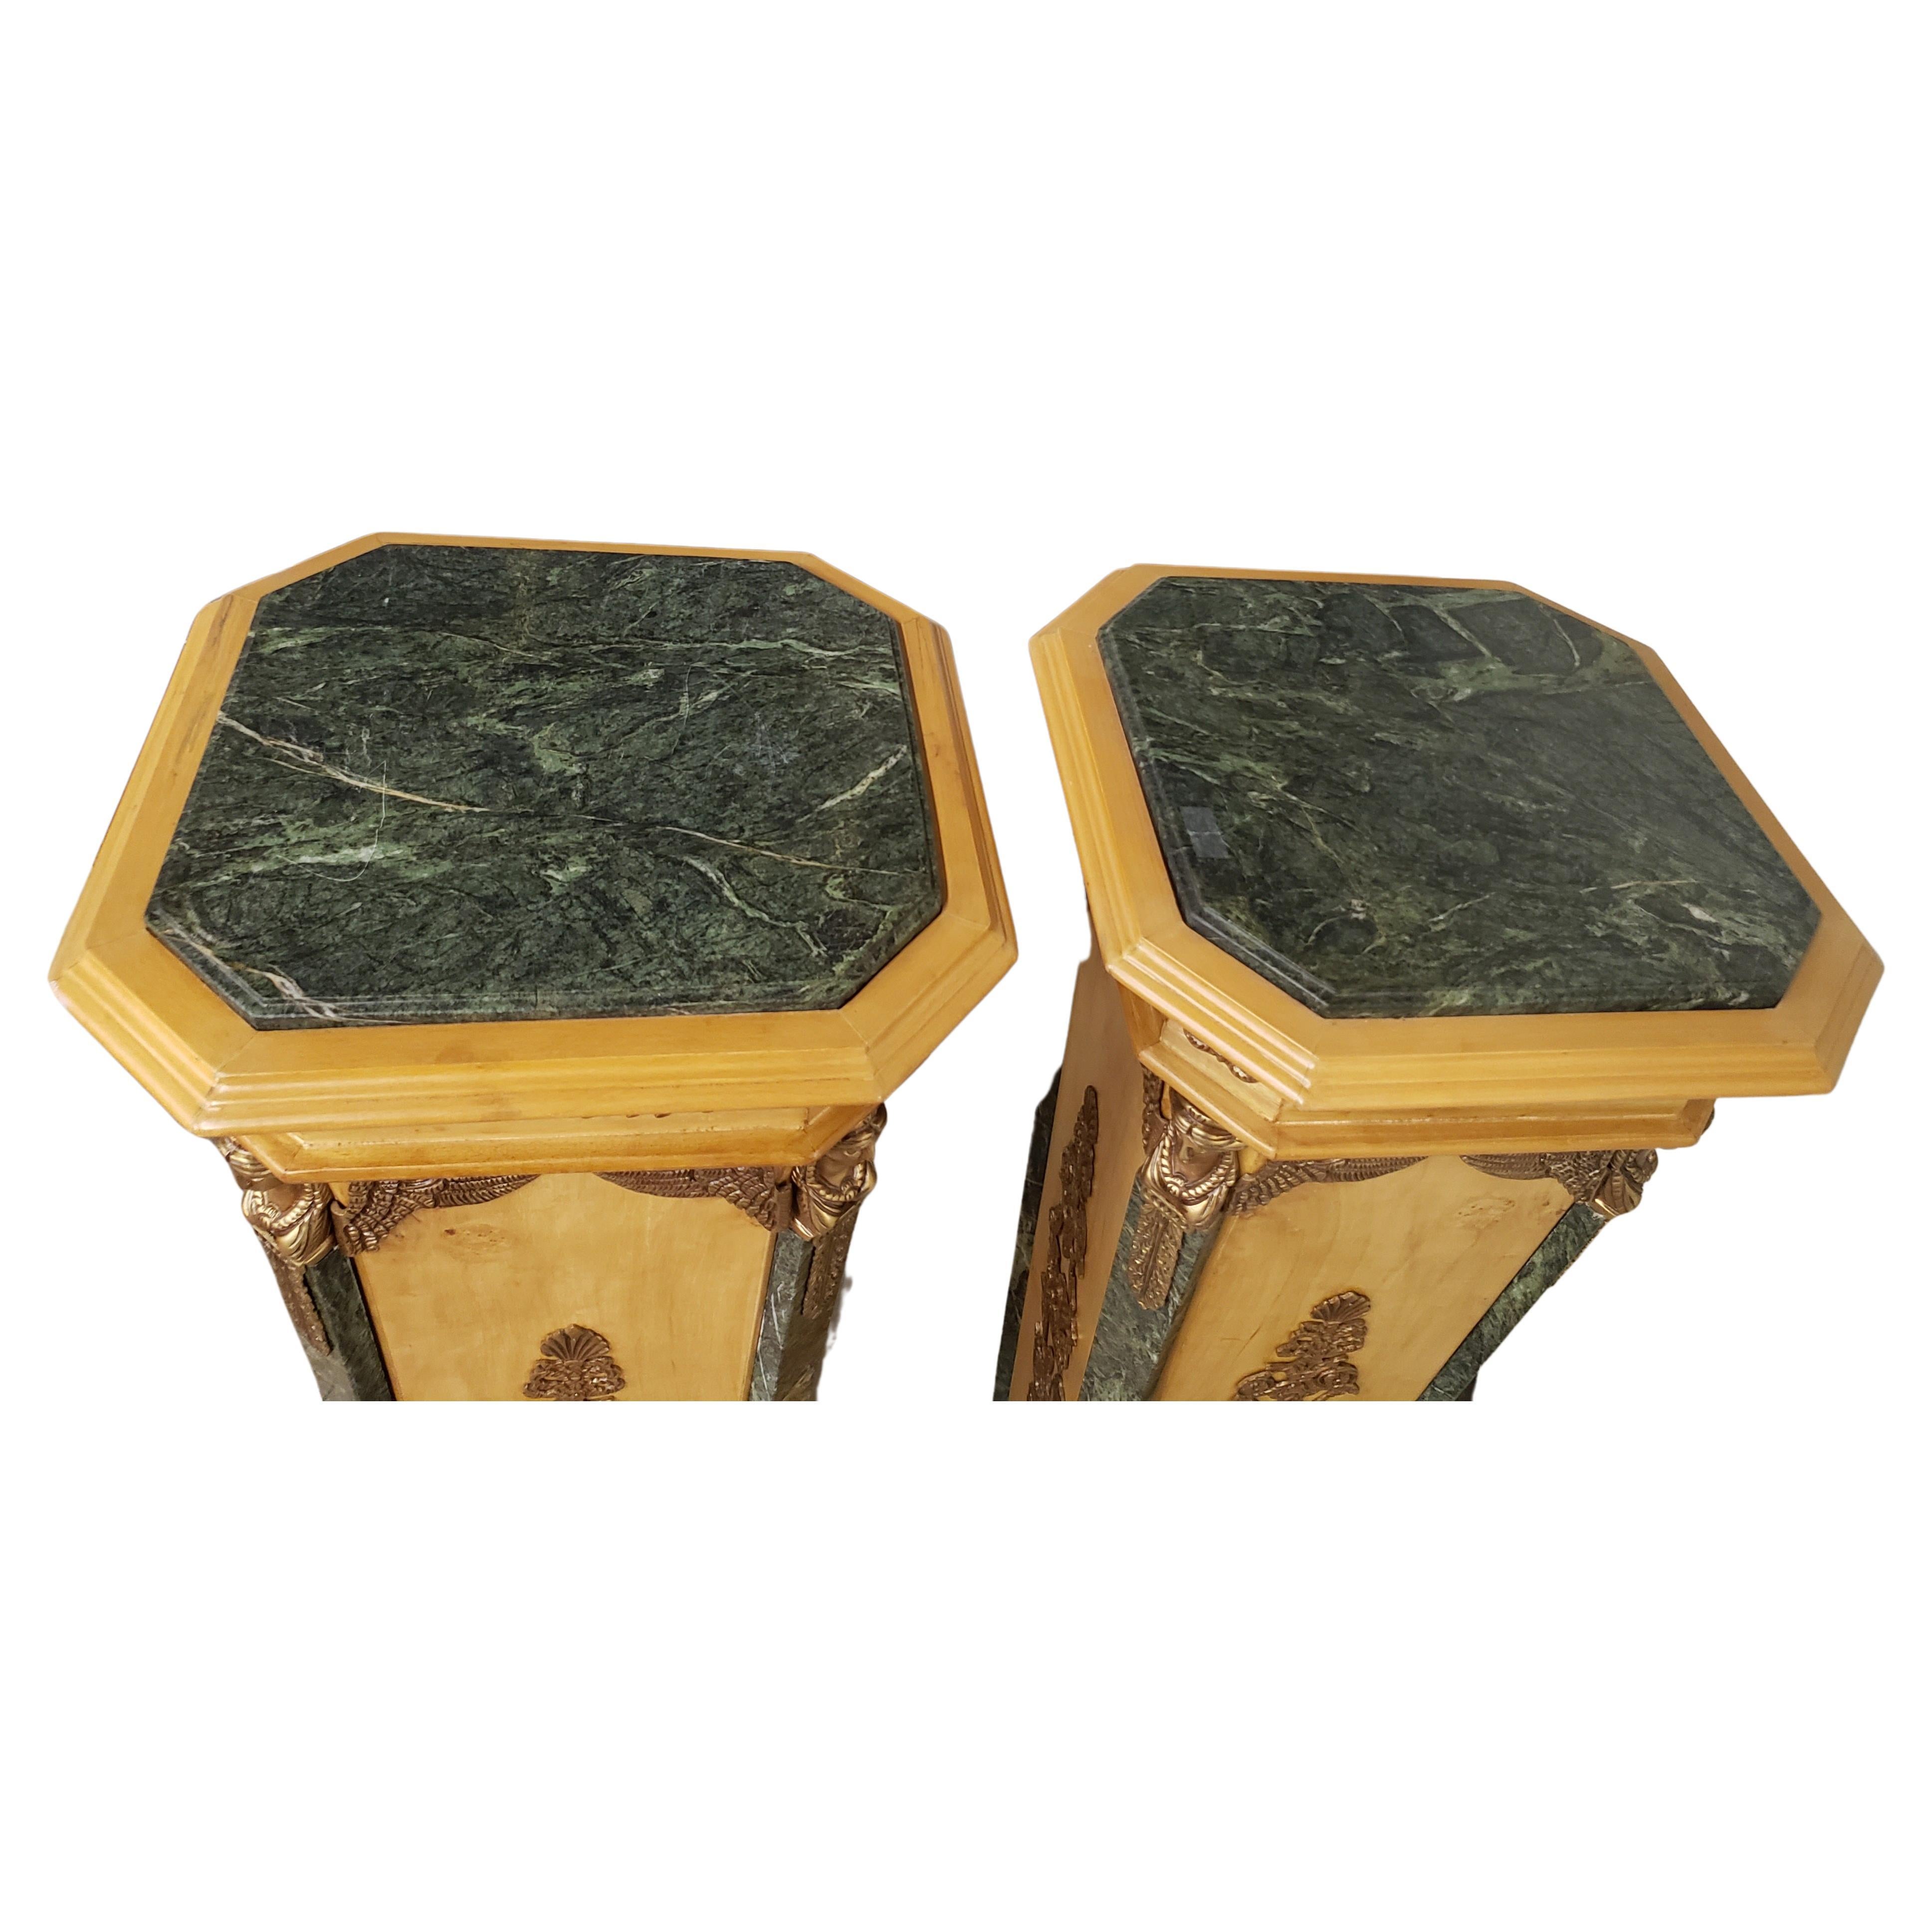 19th Century French Empire Gilt Bronze Ormolu Mottled Marble & Satinwood Pedestals, a Pair For Sale